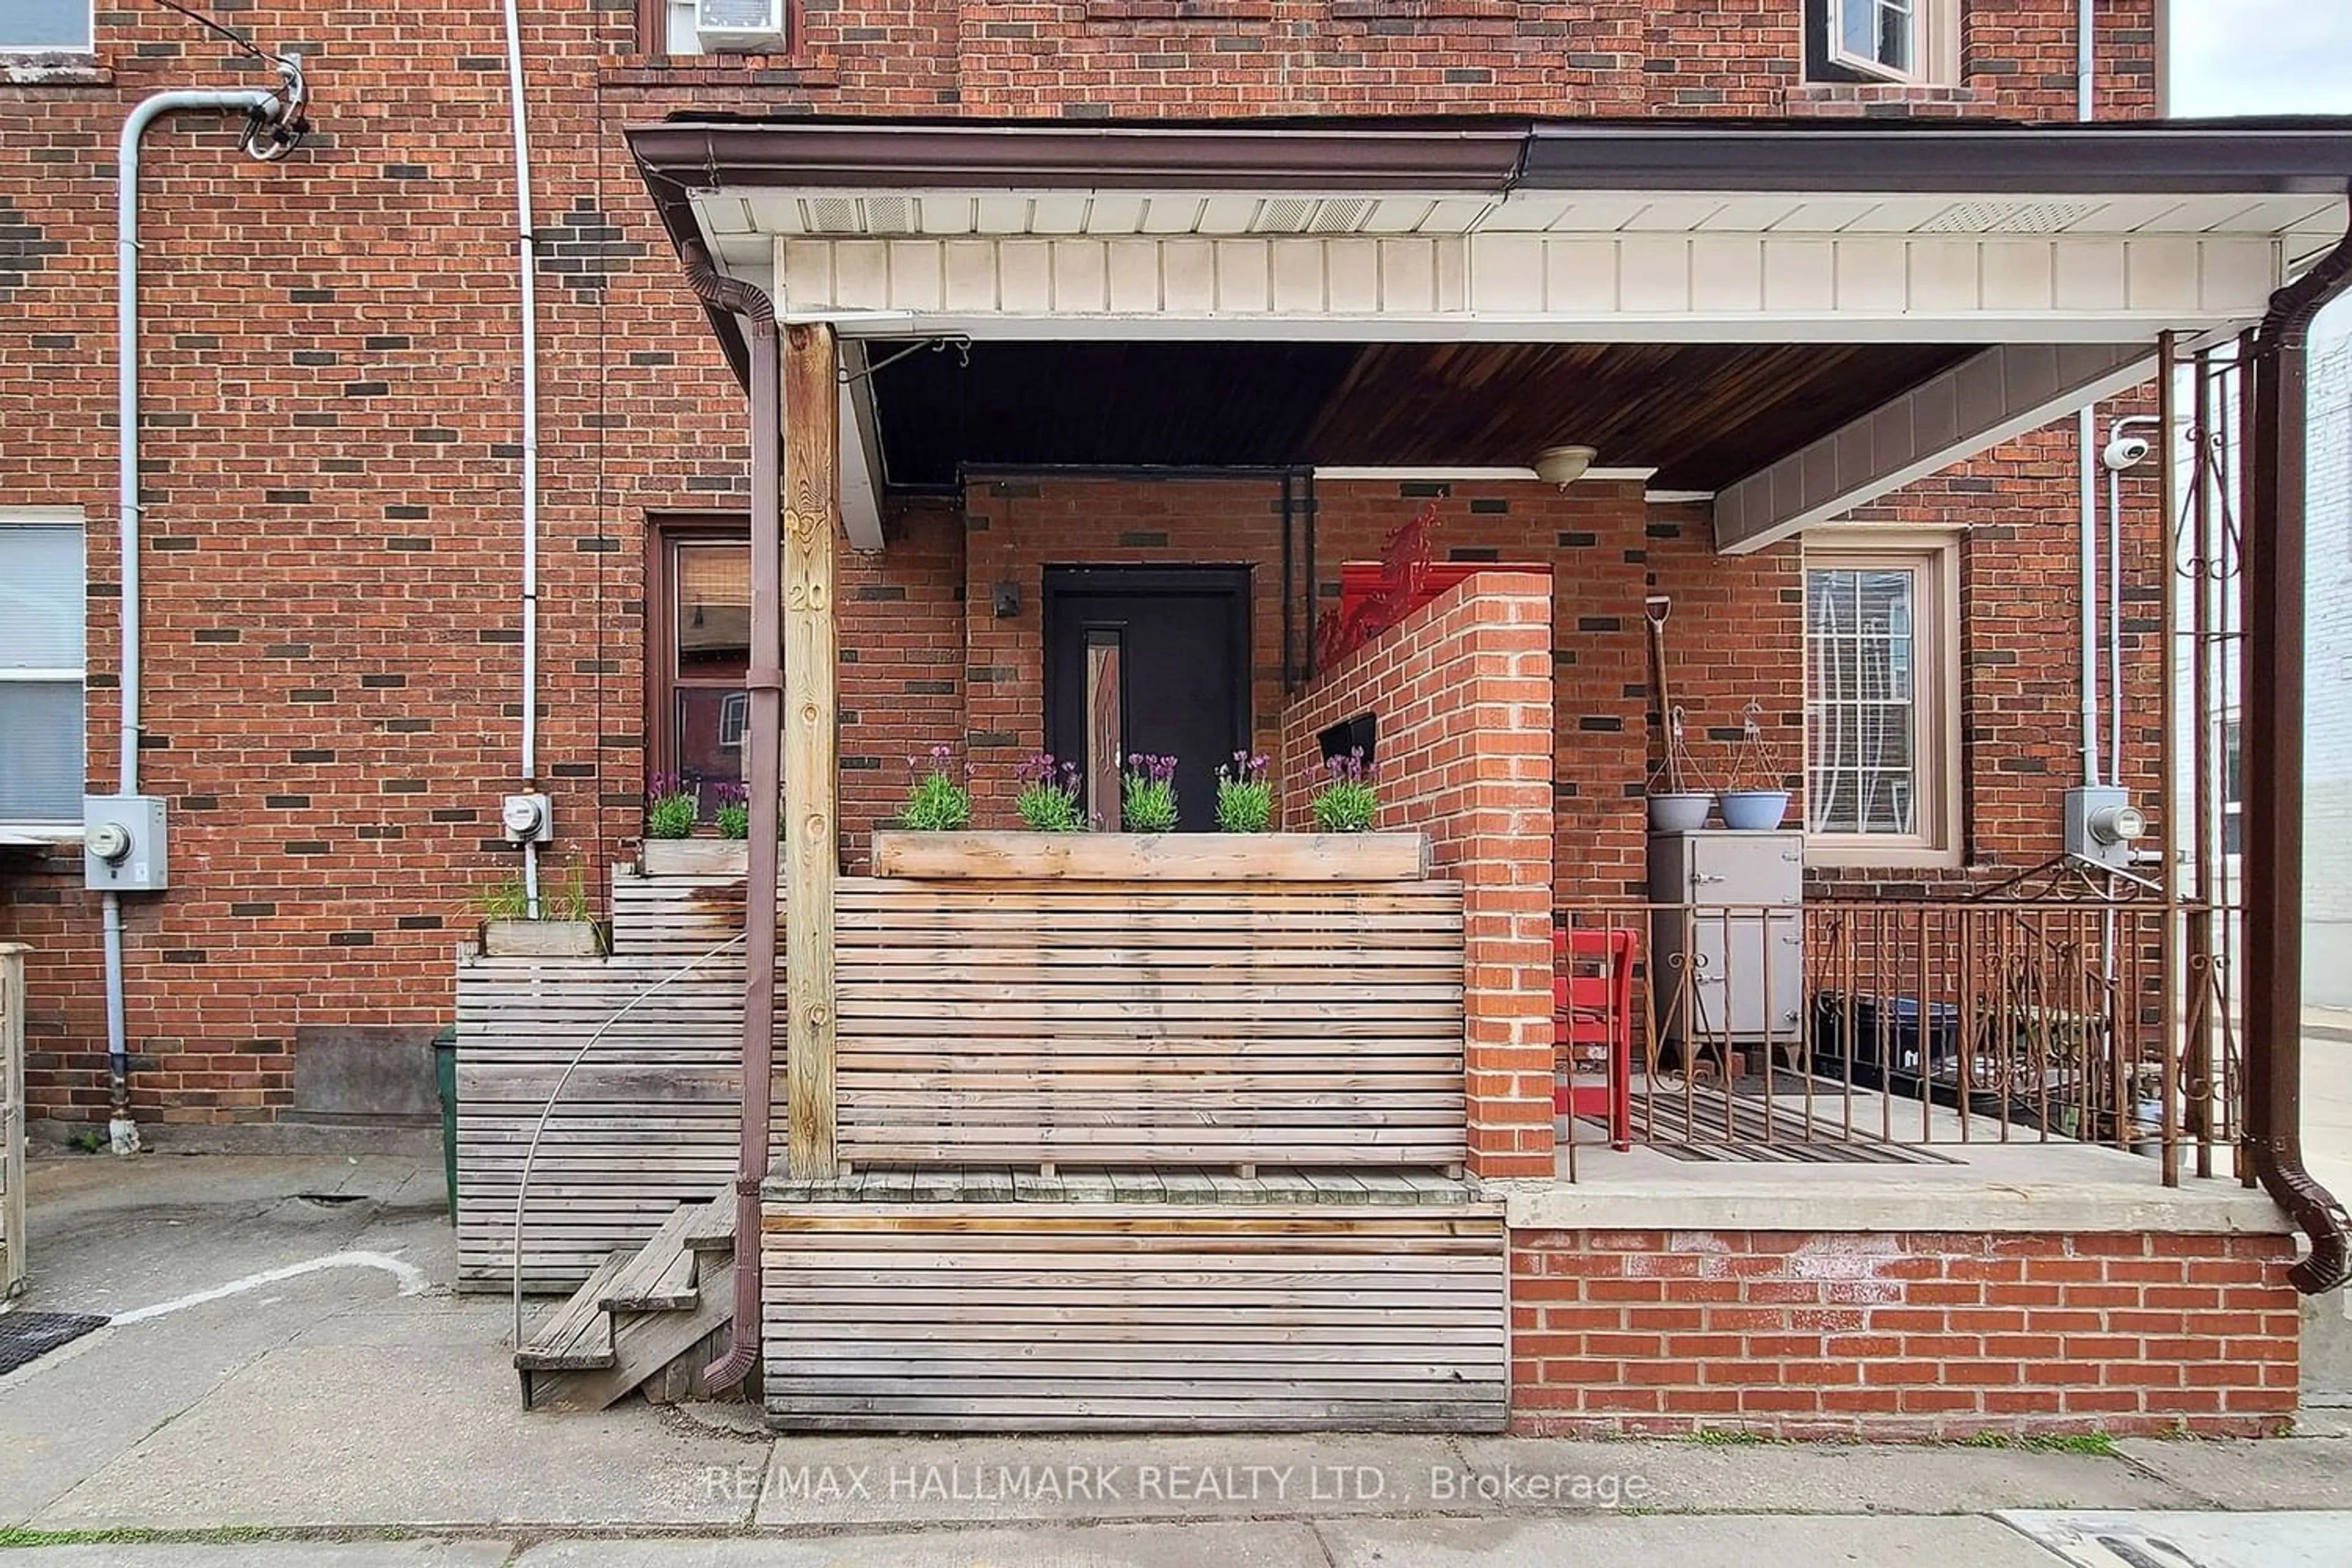 Home with brick exterior material for 20 Glasgow St, Toronto Ontario M5T 2B9